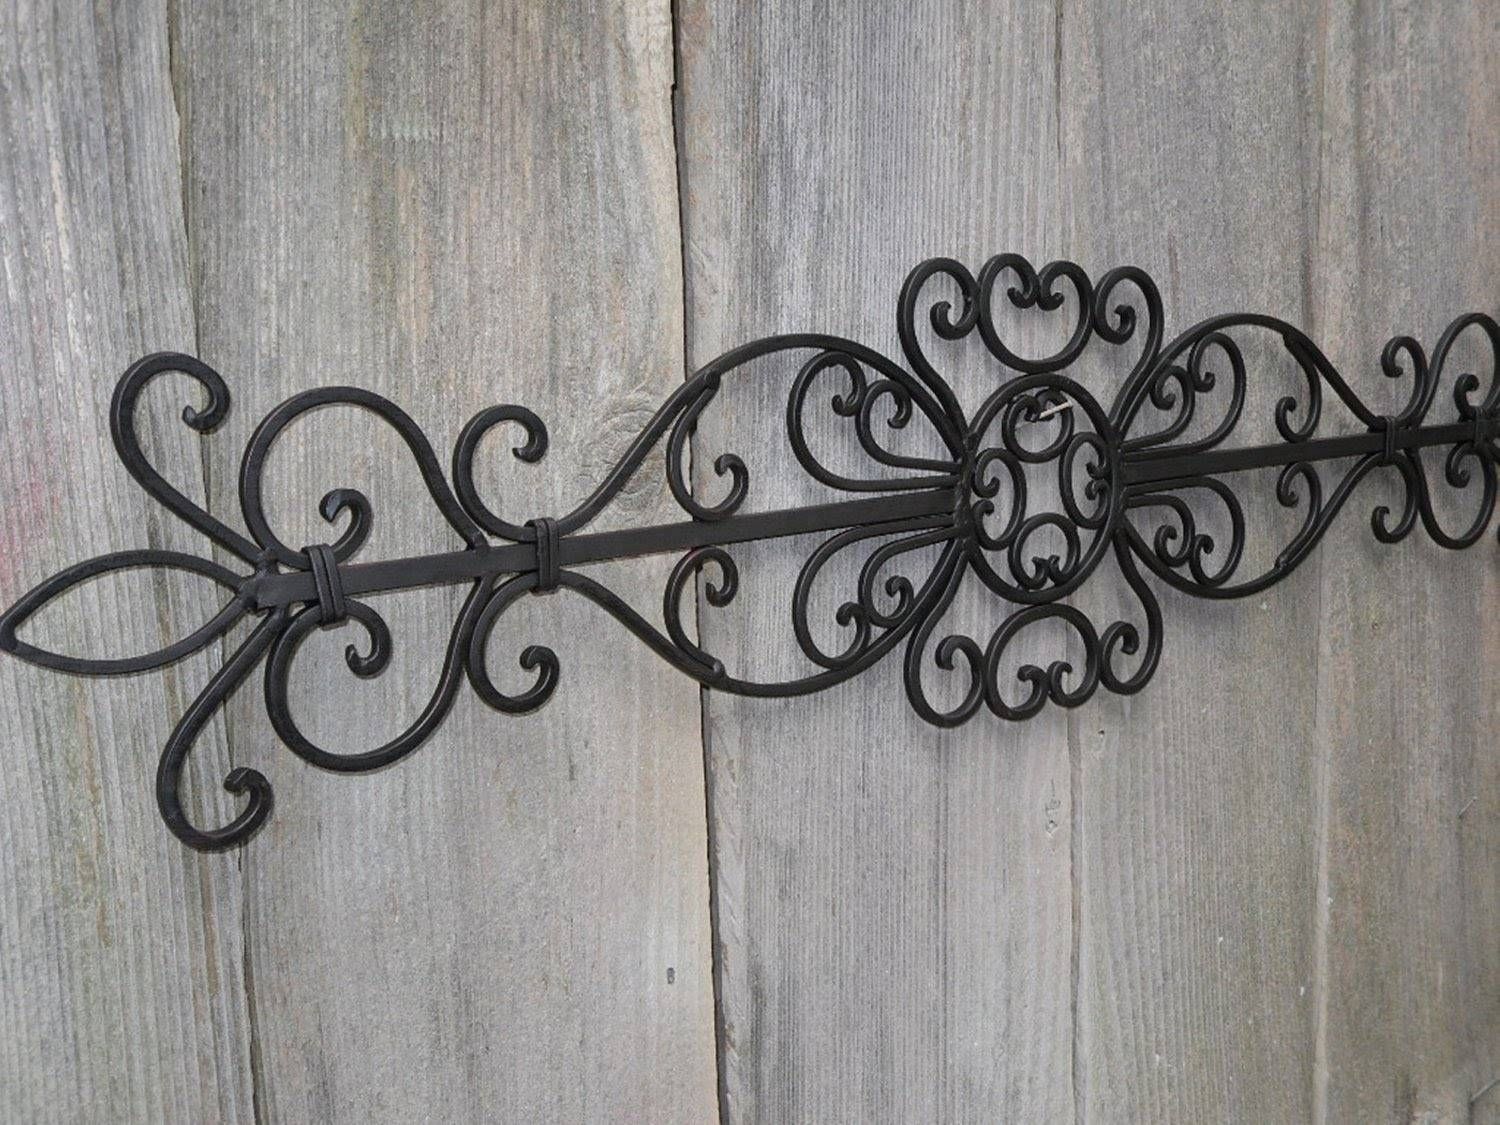 Wrought Iron Wall Decor # Wrought Iron Wall Art Decor – Youtube Pertaining To Most Recent Faux Wrought Iron Wall Art (Gallery 1 of 30)